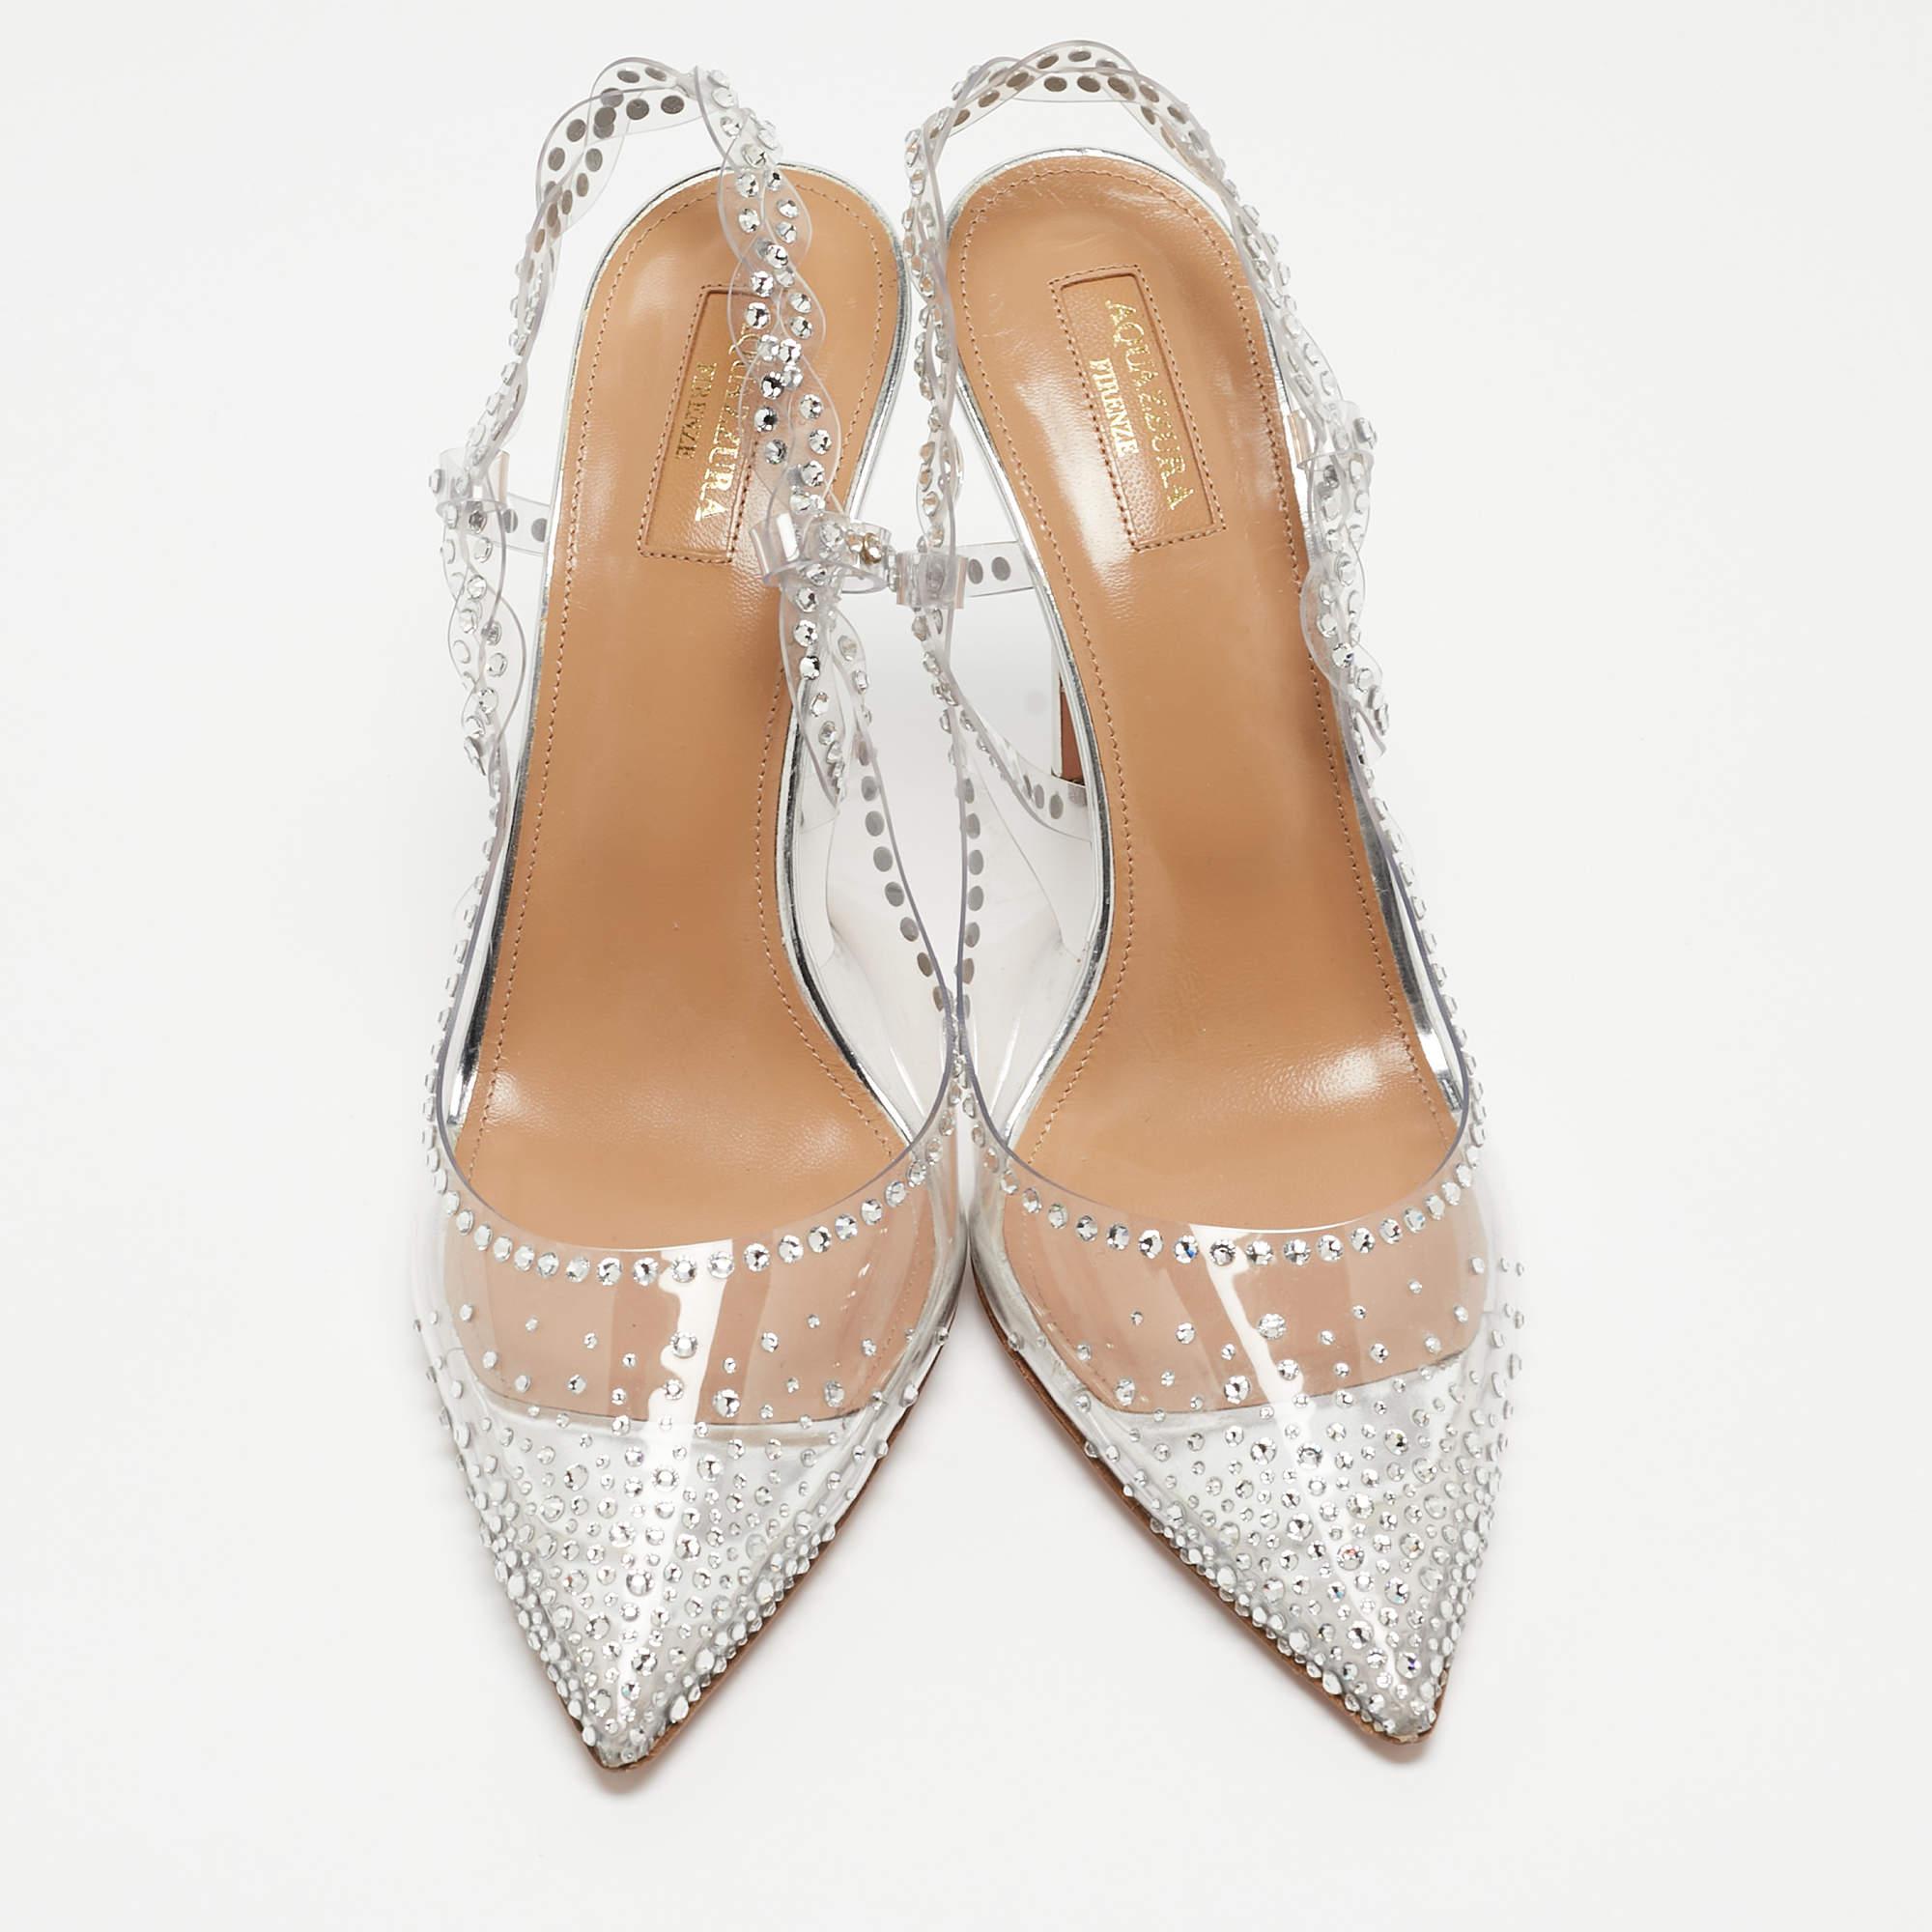 Beautiful and sophisticated, this pair of pumps from Aquazzura is a perfect alternative to your party heels. Rendered in PVC, the pair is styled with appealing embellishments and pointed toes. Complete with 12.5cm heels, team them with your ensemble